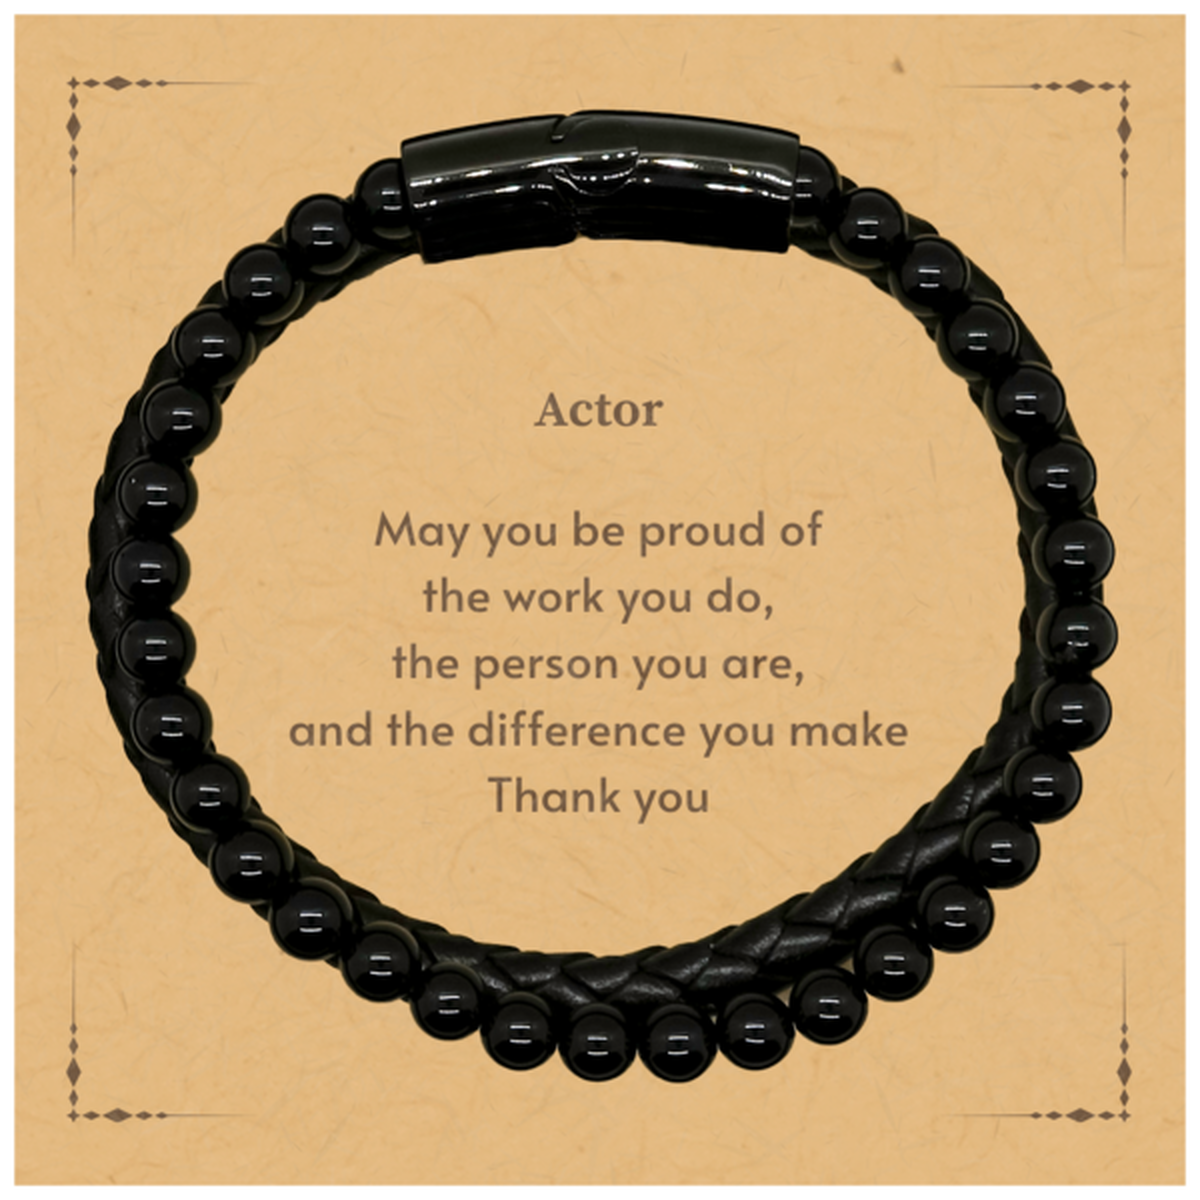 Heartwarming Stone Leather Bracelets Retirement Coworkers Gifts for Actor, Actor May You be proud of the work you do, the person you are Gifts for Boss Men Women Friends